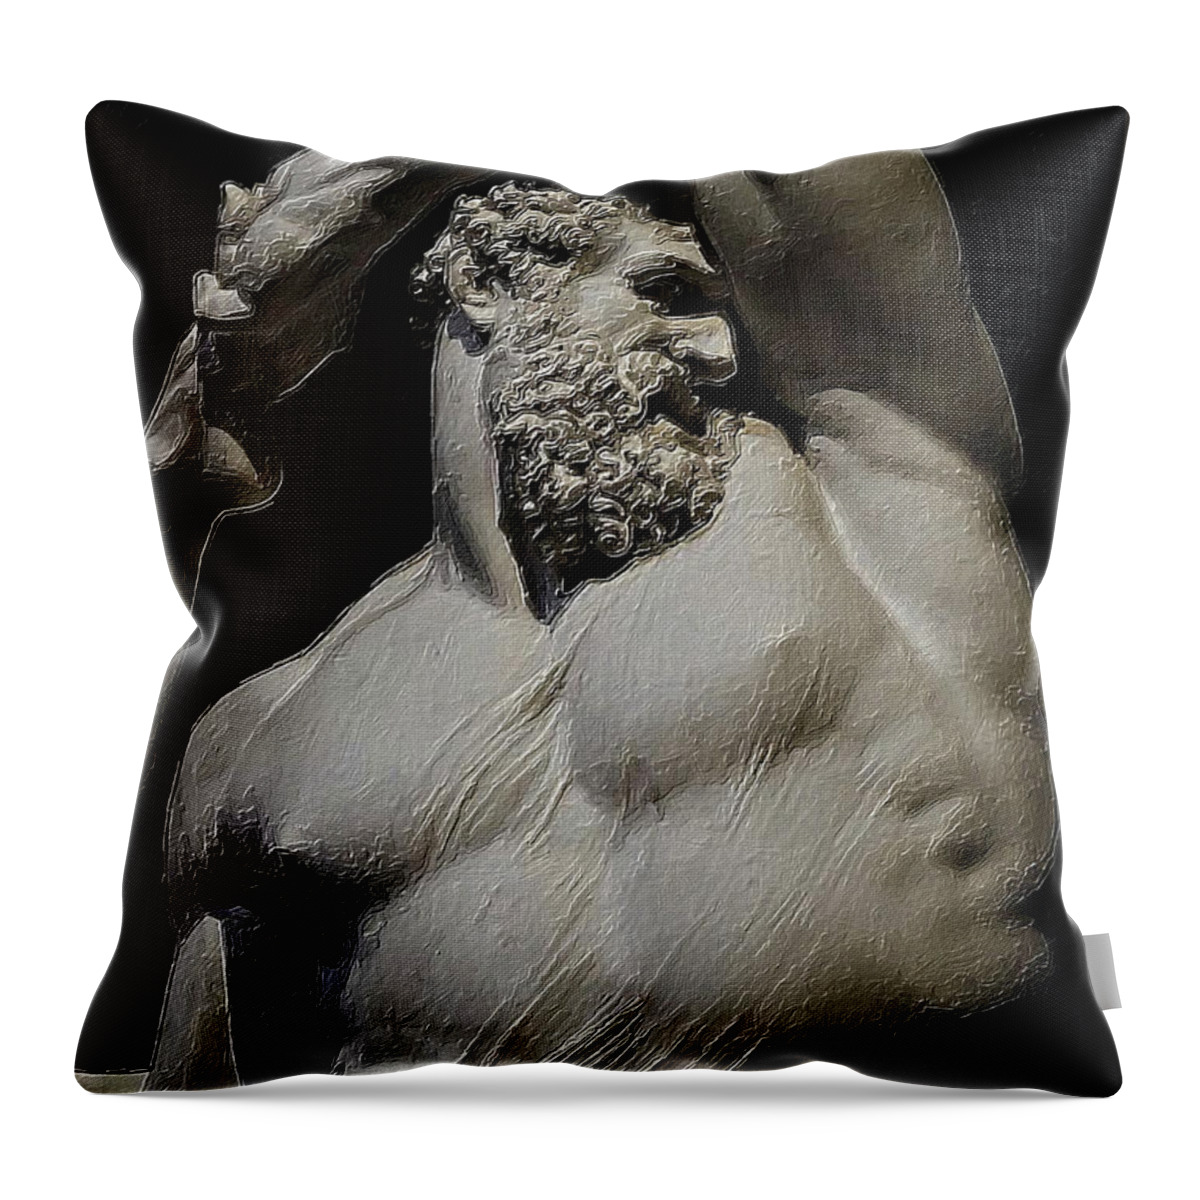 Broken Throw Pillow featuring the painting Zeus Statue by Tony Rubino